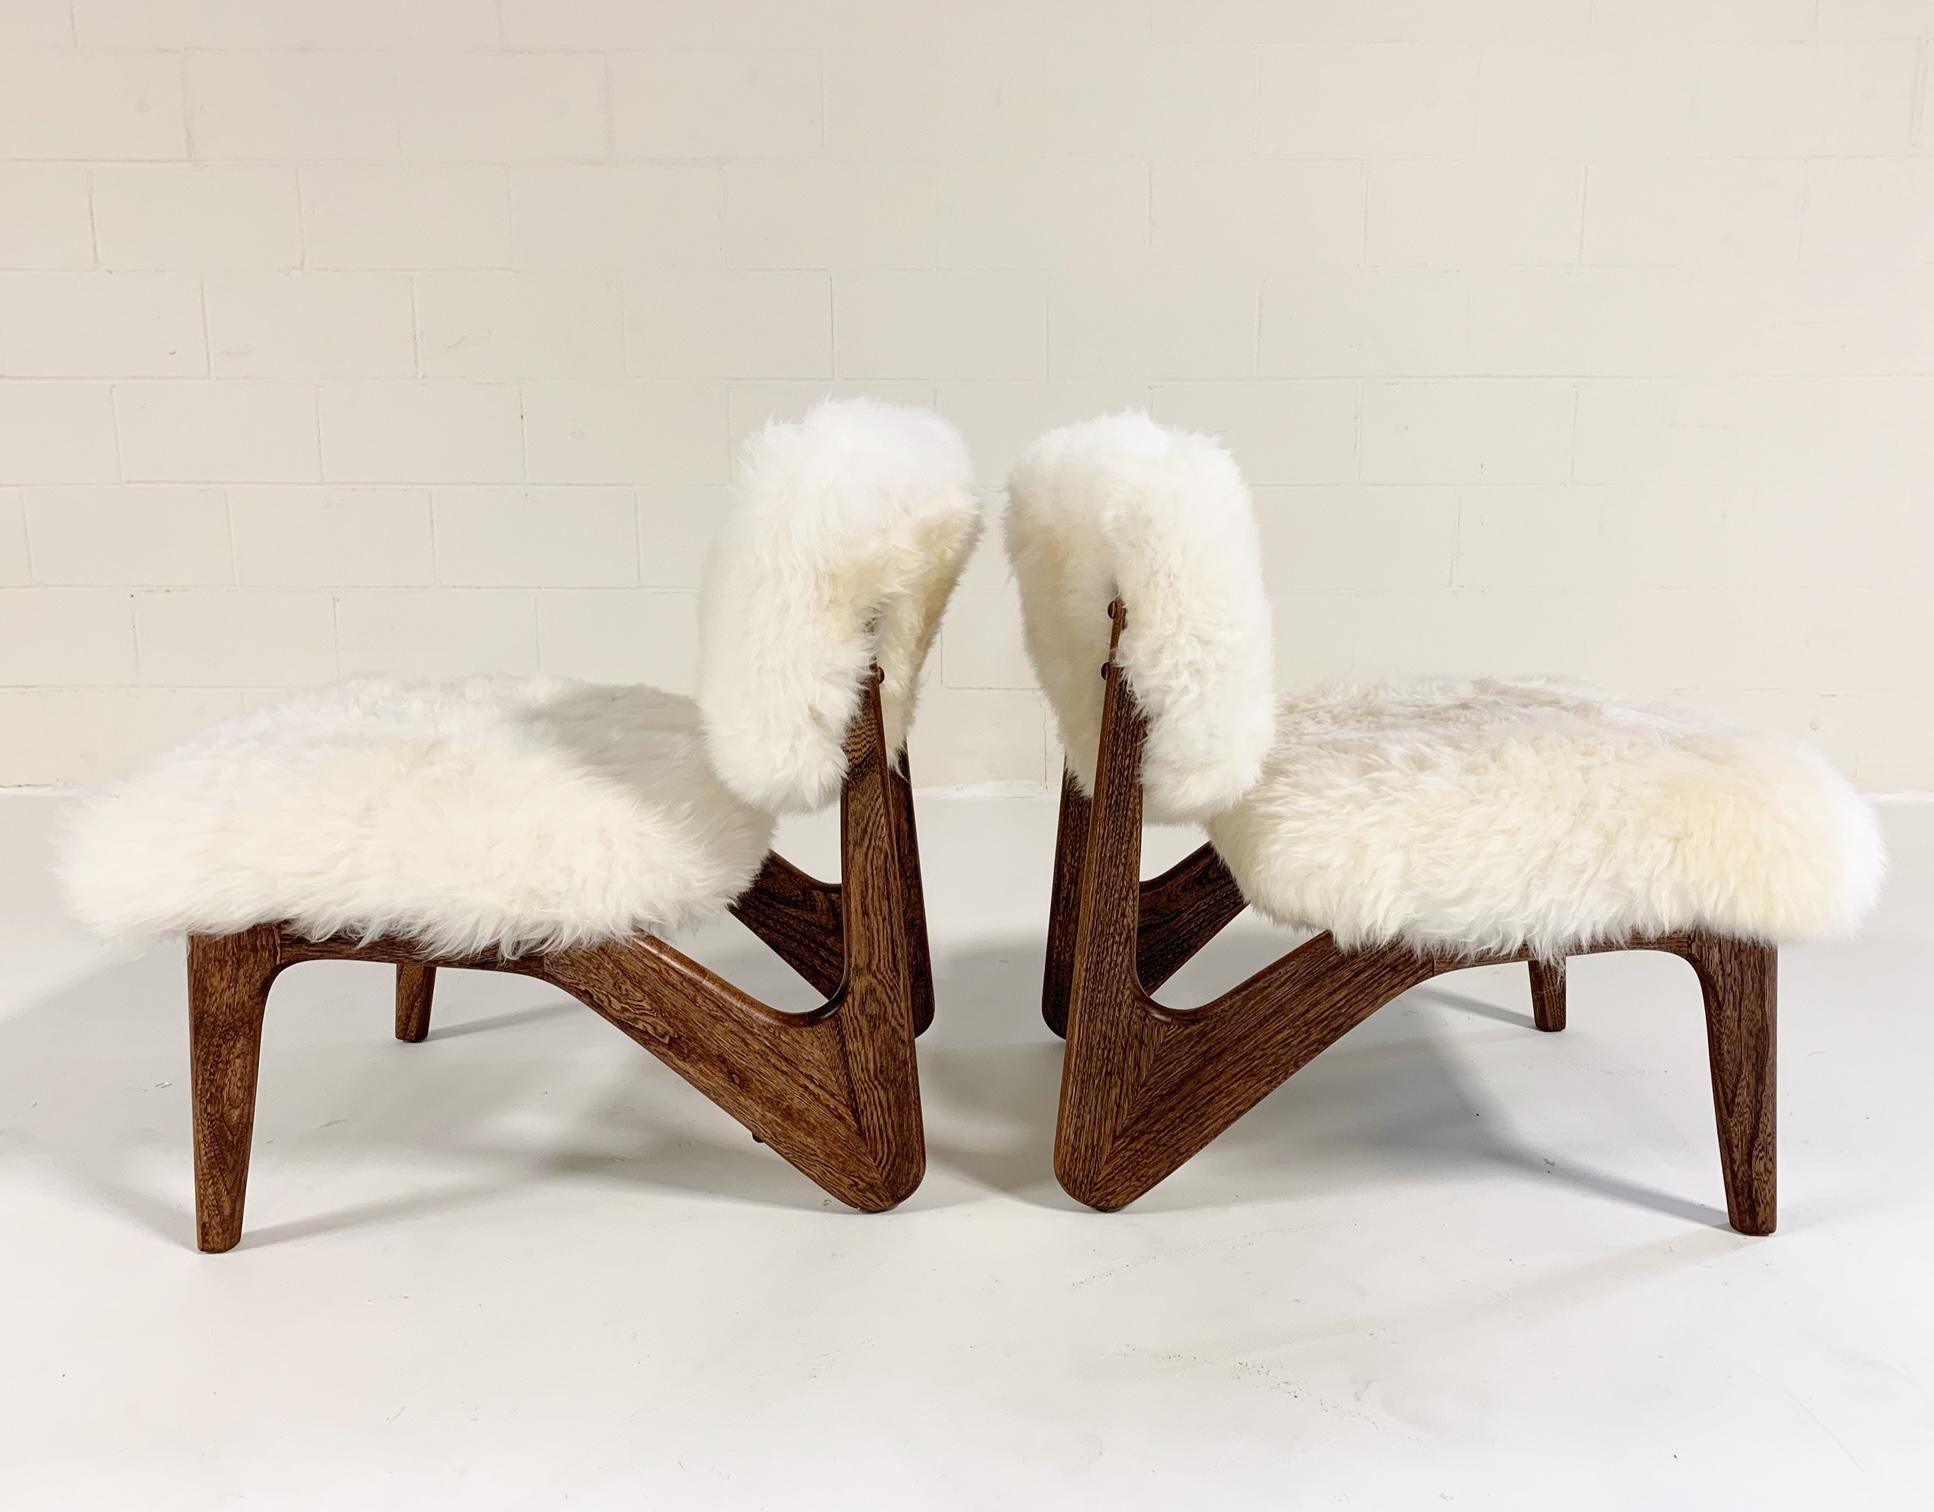 We love the look of these lounge chairs, in the style of the sculptural designs of Adrian Pearsall. A great look from every angle! For their restoration, our designers chose the beautifully soft and thick Brazilian sheepskin to bring out the warm